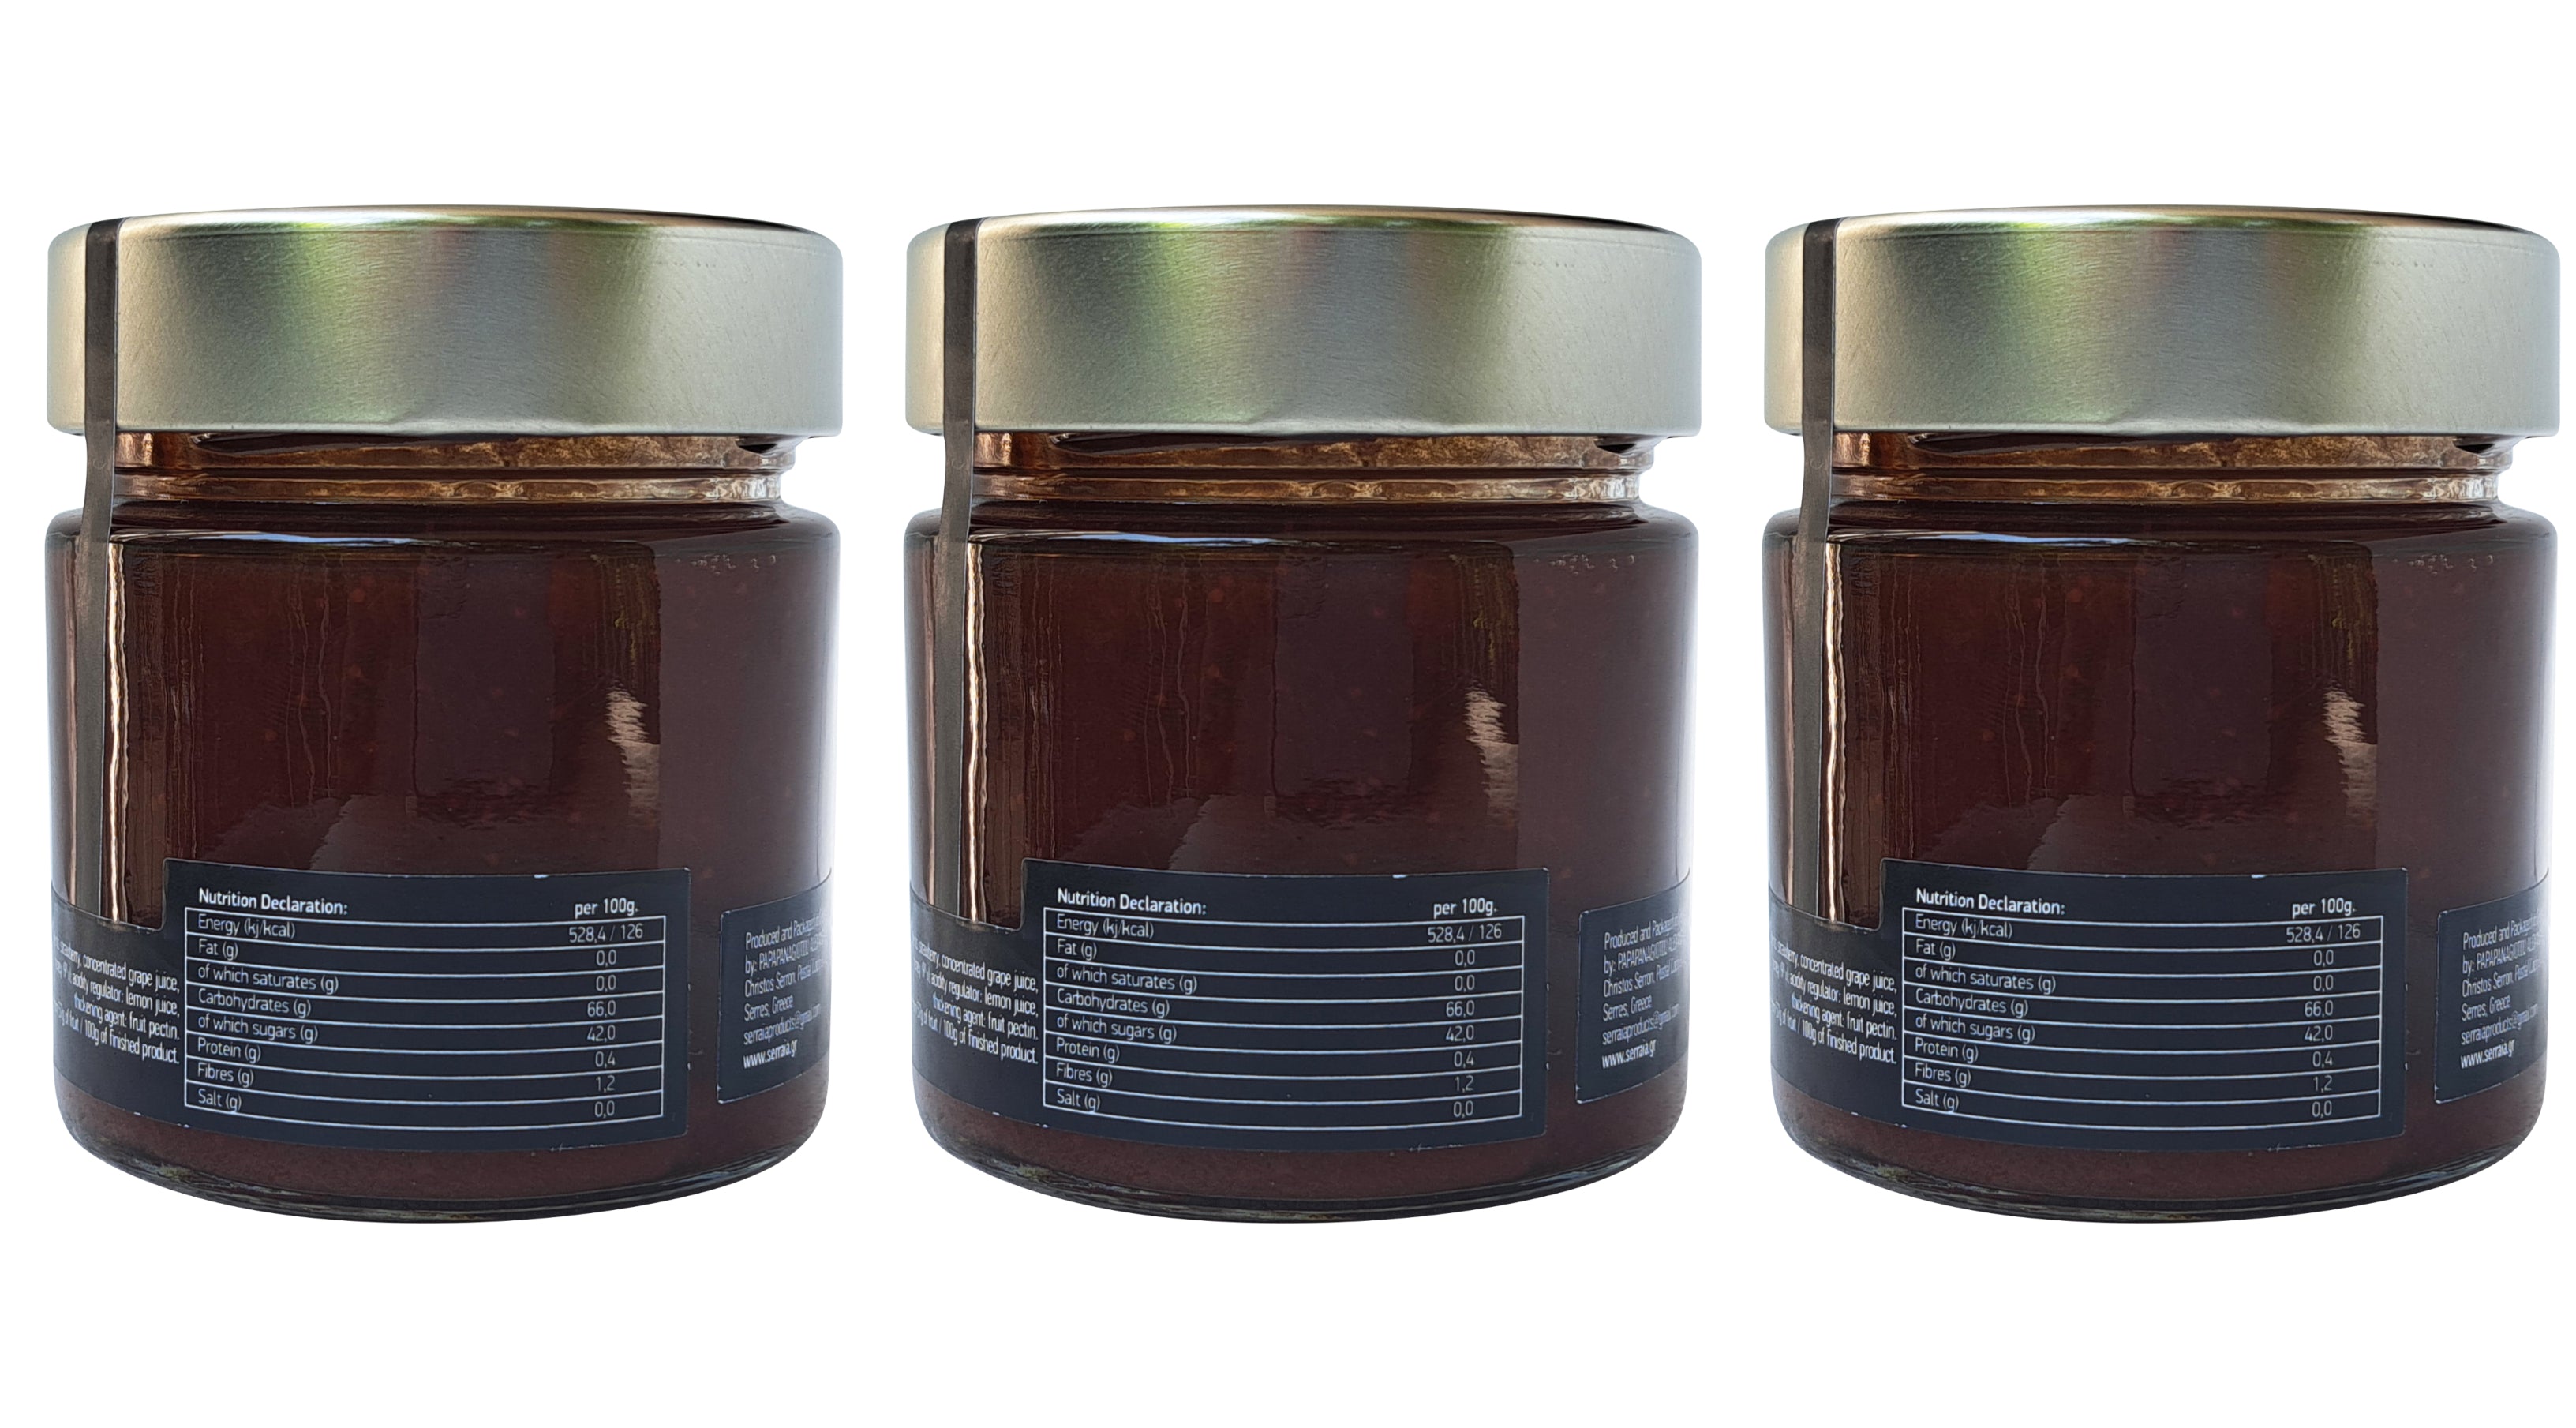 Greek Natural 100% Ηandmade Fruit Spread Strawberry with Honey 5